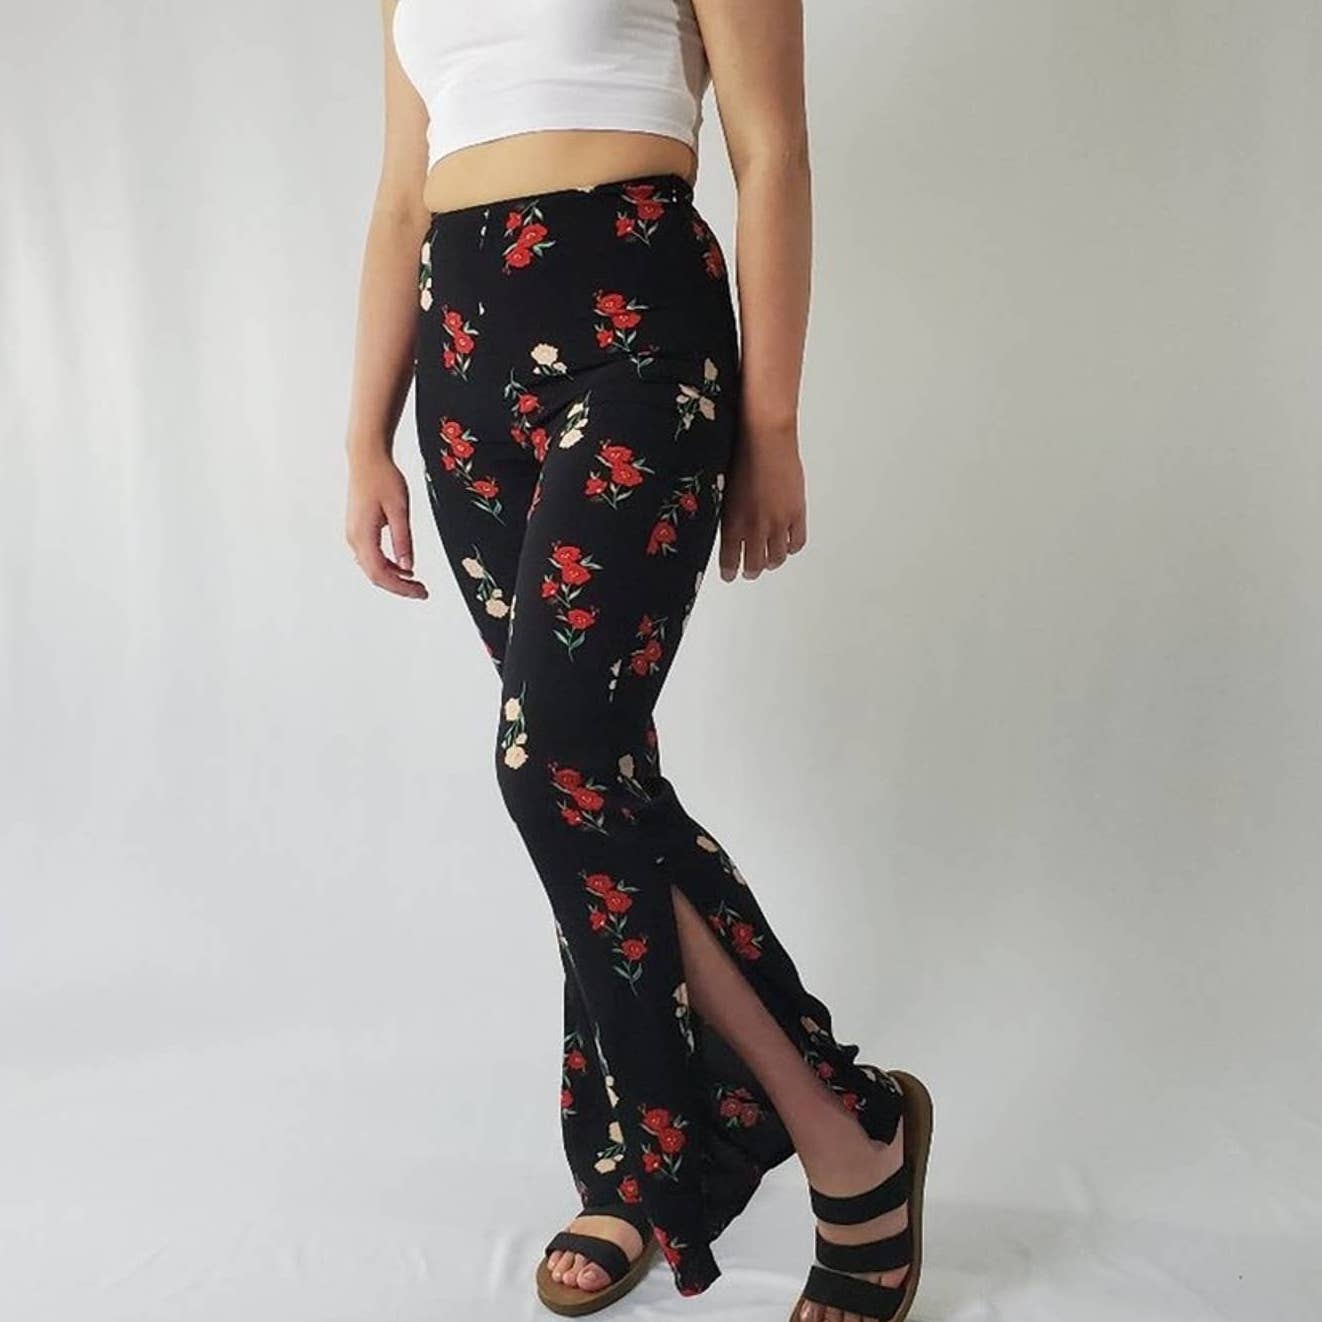 Forever 21 Floral Wide Leg Pants - S